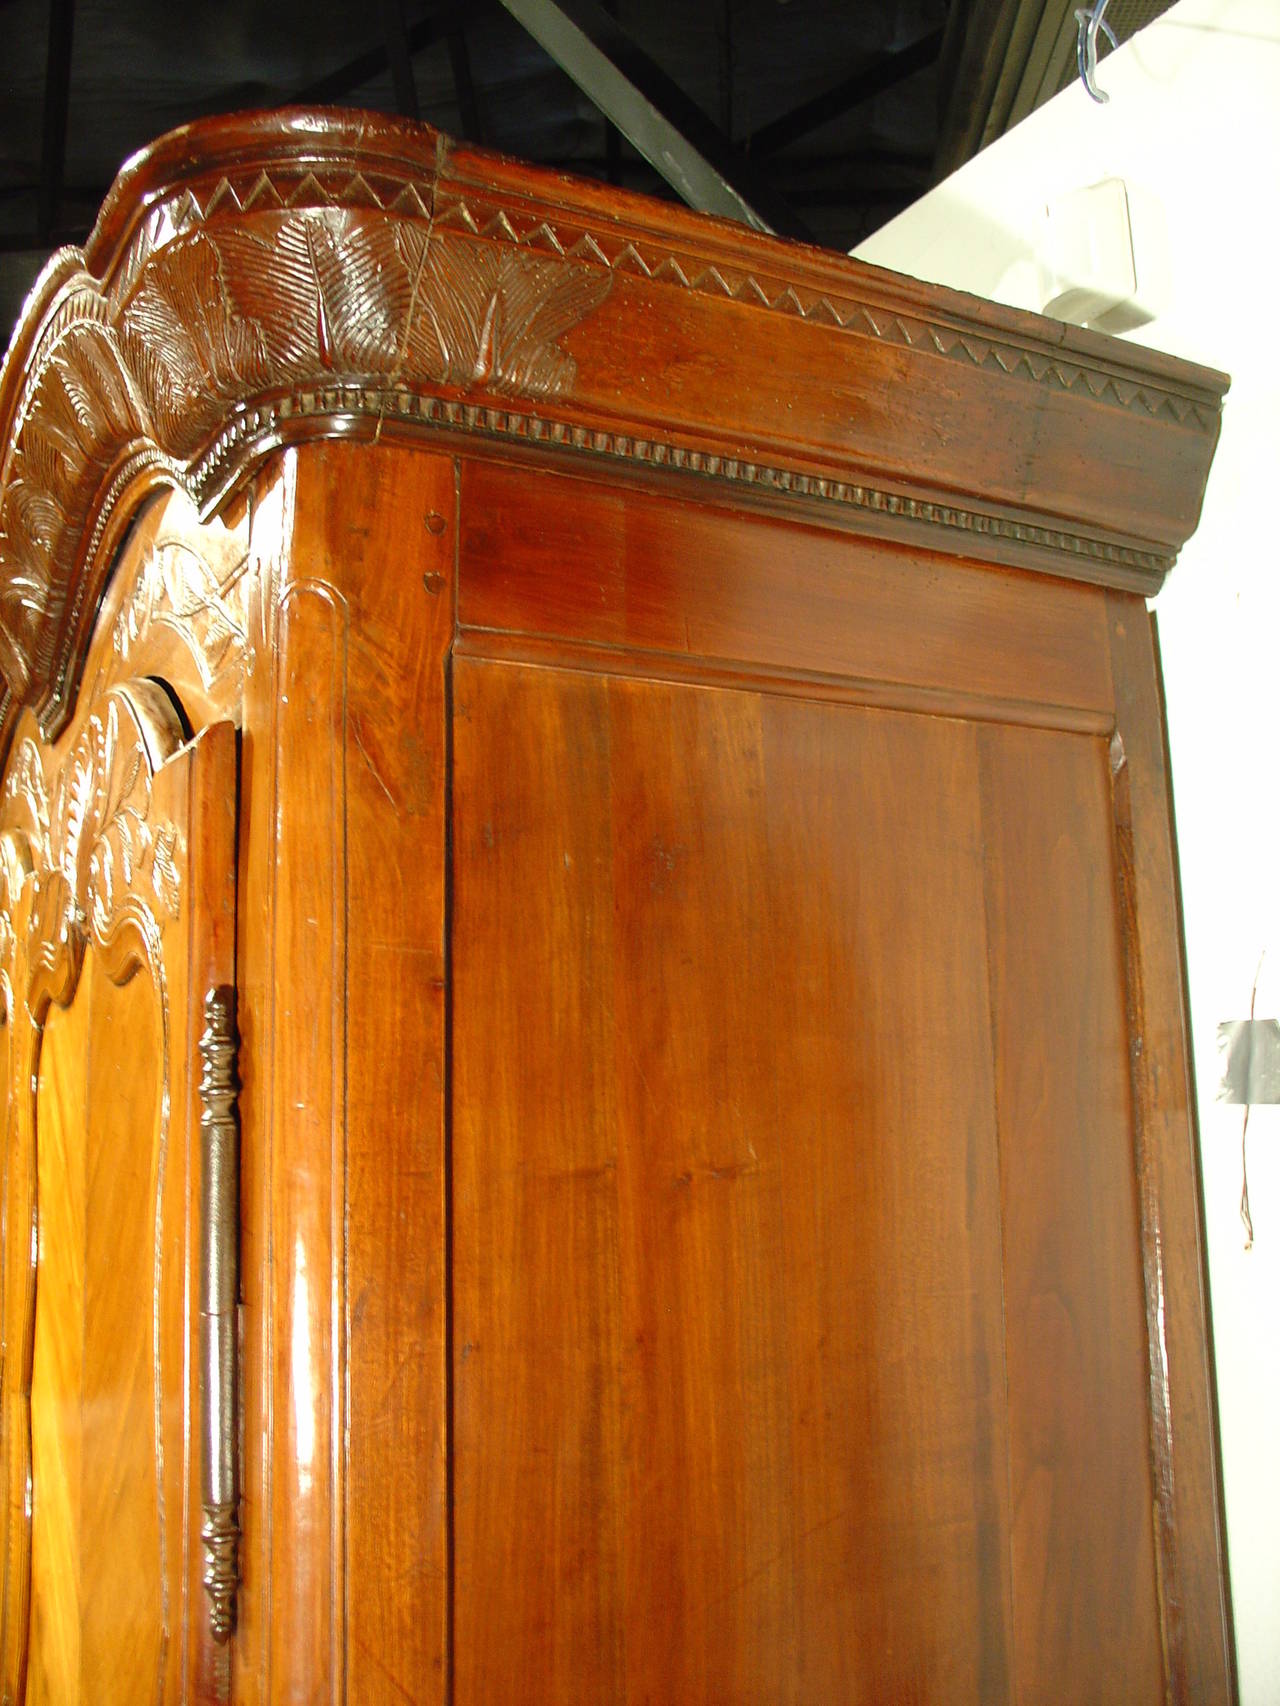 This antique double Chapeau de Gendarme armoire made of cherry wood (and secondary woods) from the area around Rennes, Brittany, France. It has hand carved decorative motifs and it is inscribed with it's created date: L A N 1822 (the year 1822) on